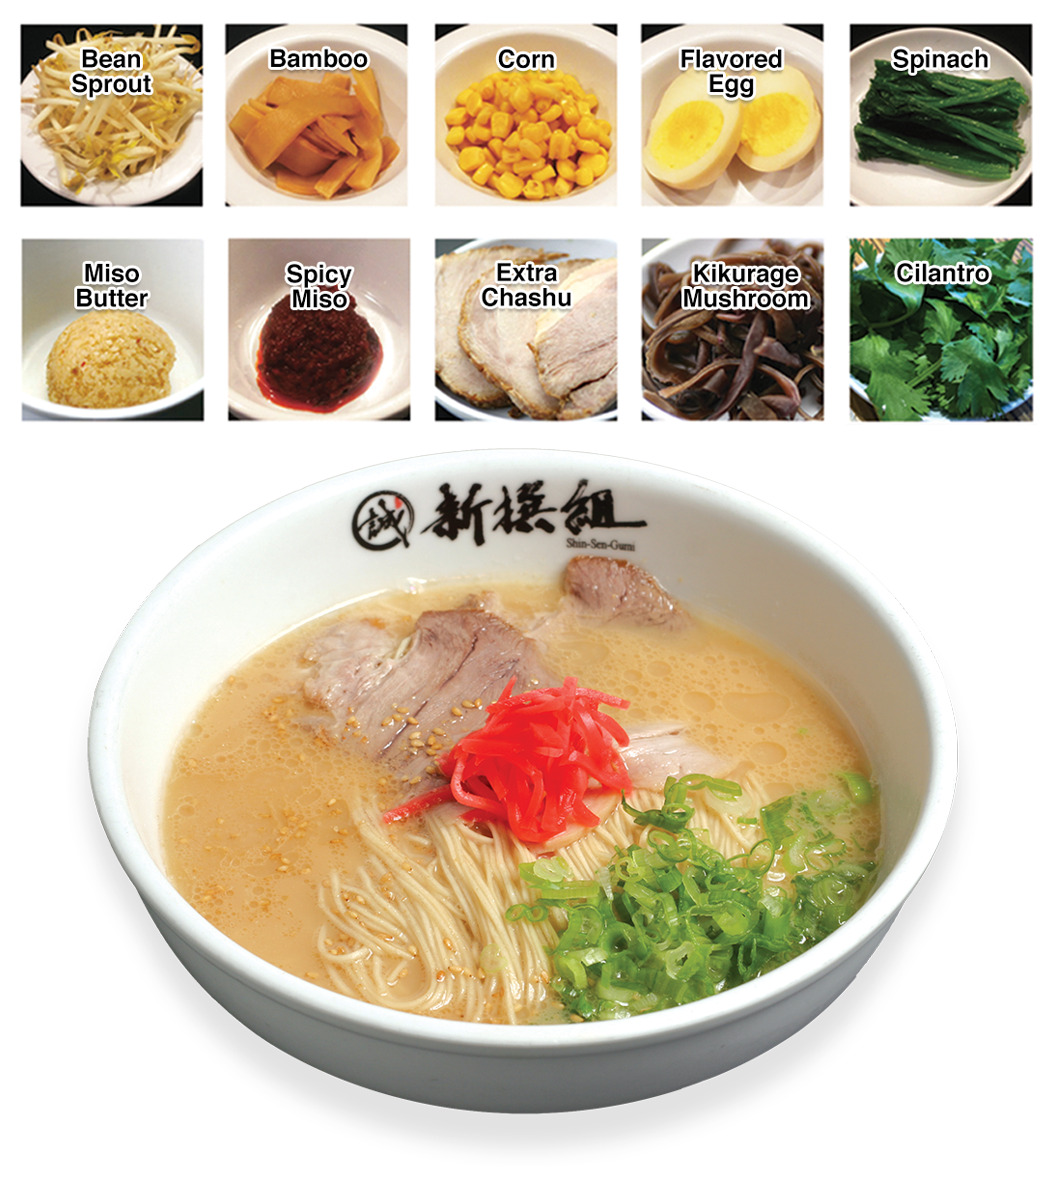 Photo of Ramen Toppings: 1. Bean sprout, 2. Bamboo, 3. Corn, 4. Hard Boiled Flavored Egg, 5. Spinach, 6. Miso Butter, 7. Spicy Miso, 8. Extra Chashu Pork, 9. Kikurage mushroom and 10. Cilantro. Under the topping list, white bowl w/ Kanji Shin-Sen-Gumim logo, Hakata ramen, thin noodles in pork based soup, topped w/ red ginger & green onion